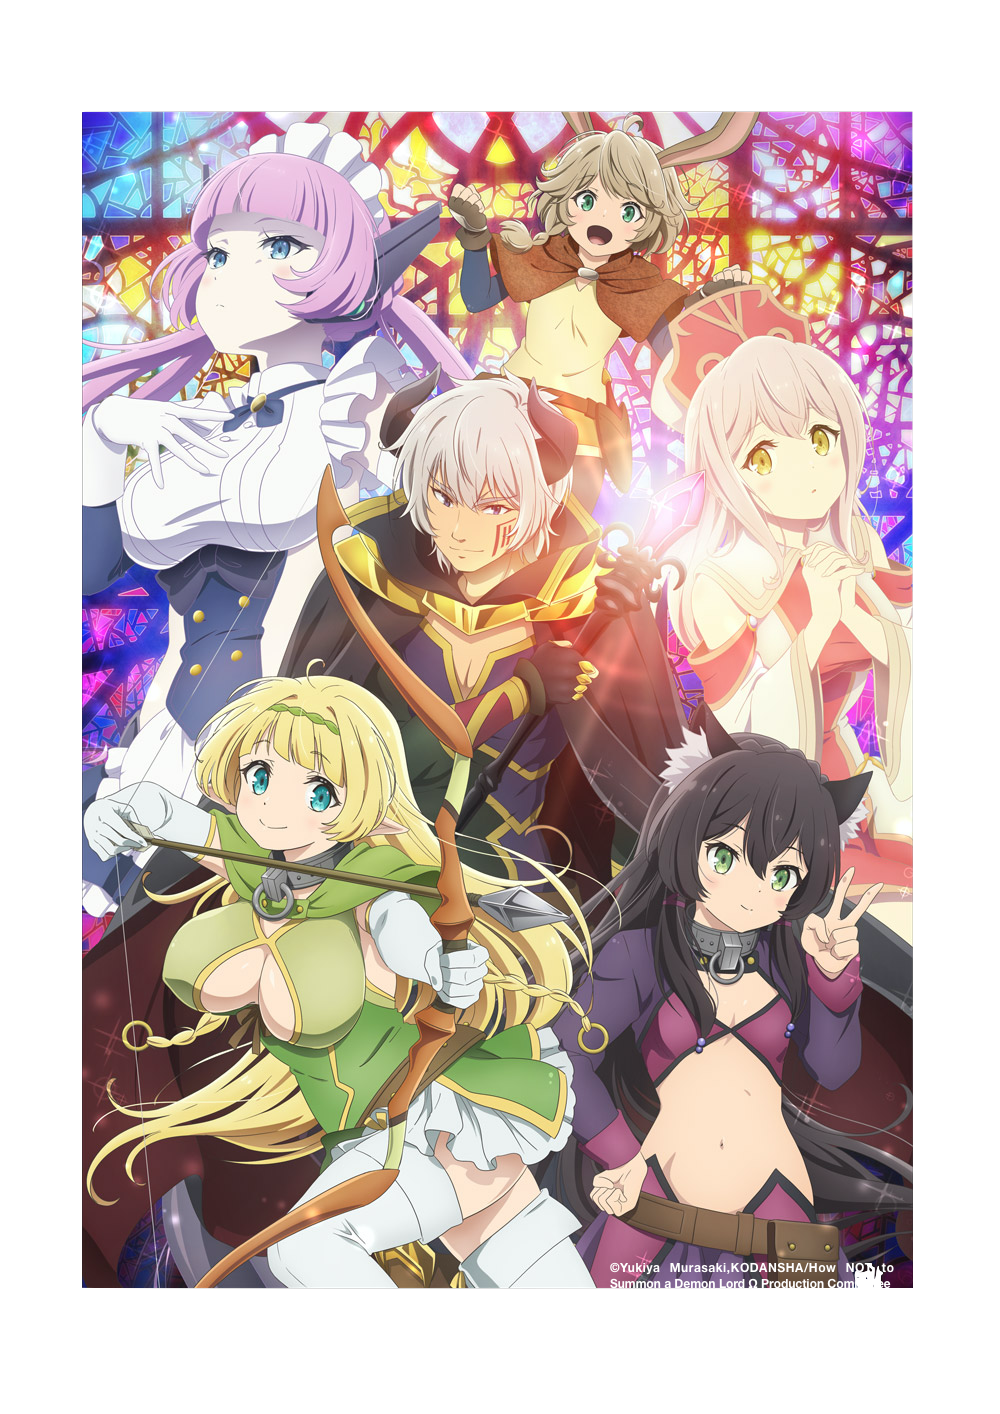 Season 2 of 'How NOT to Summon a Demon Lord': Release Date & Visual Revealed